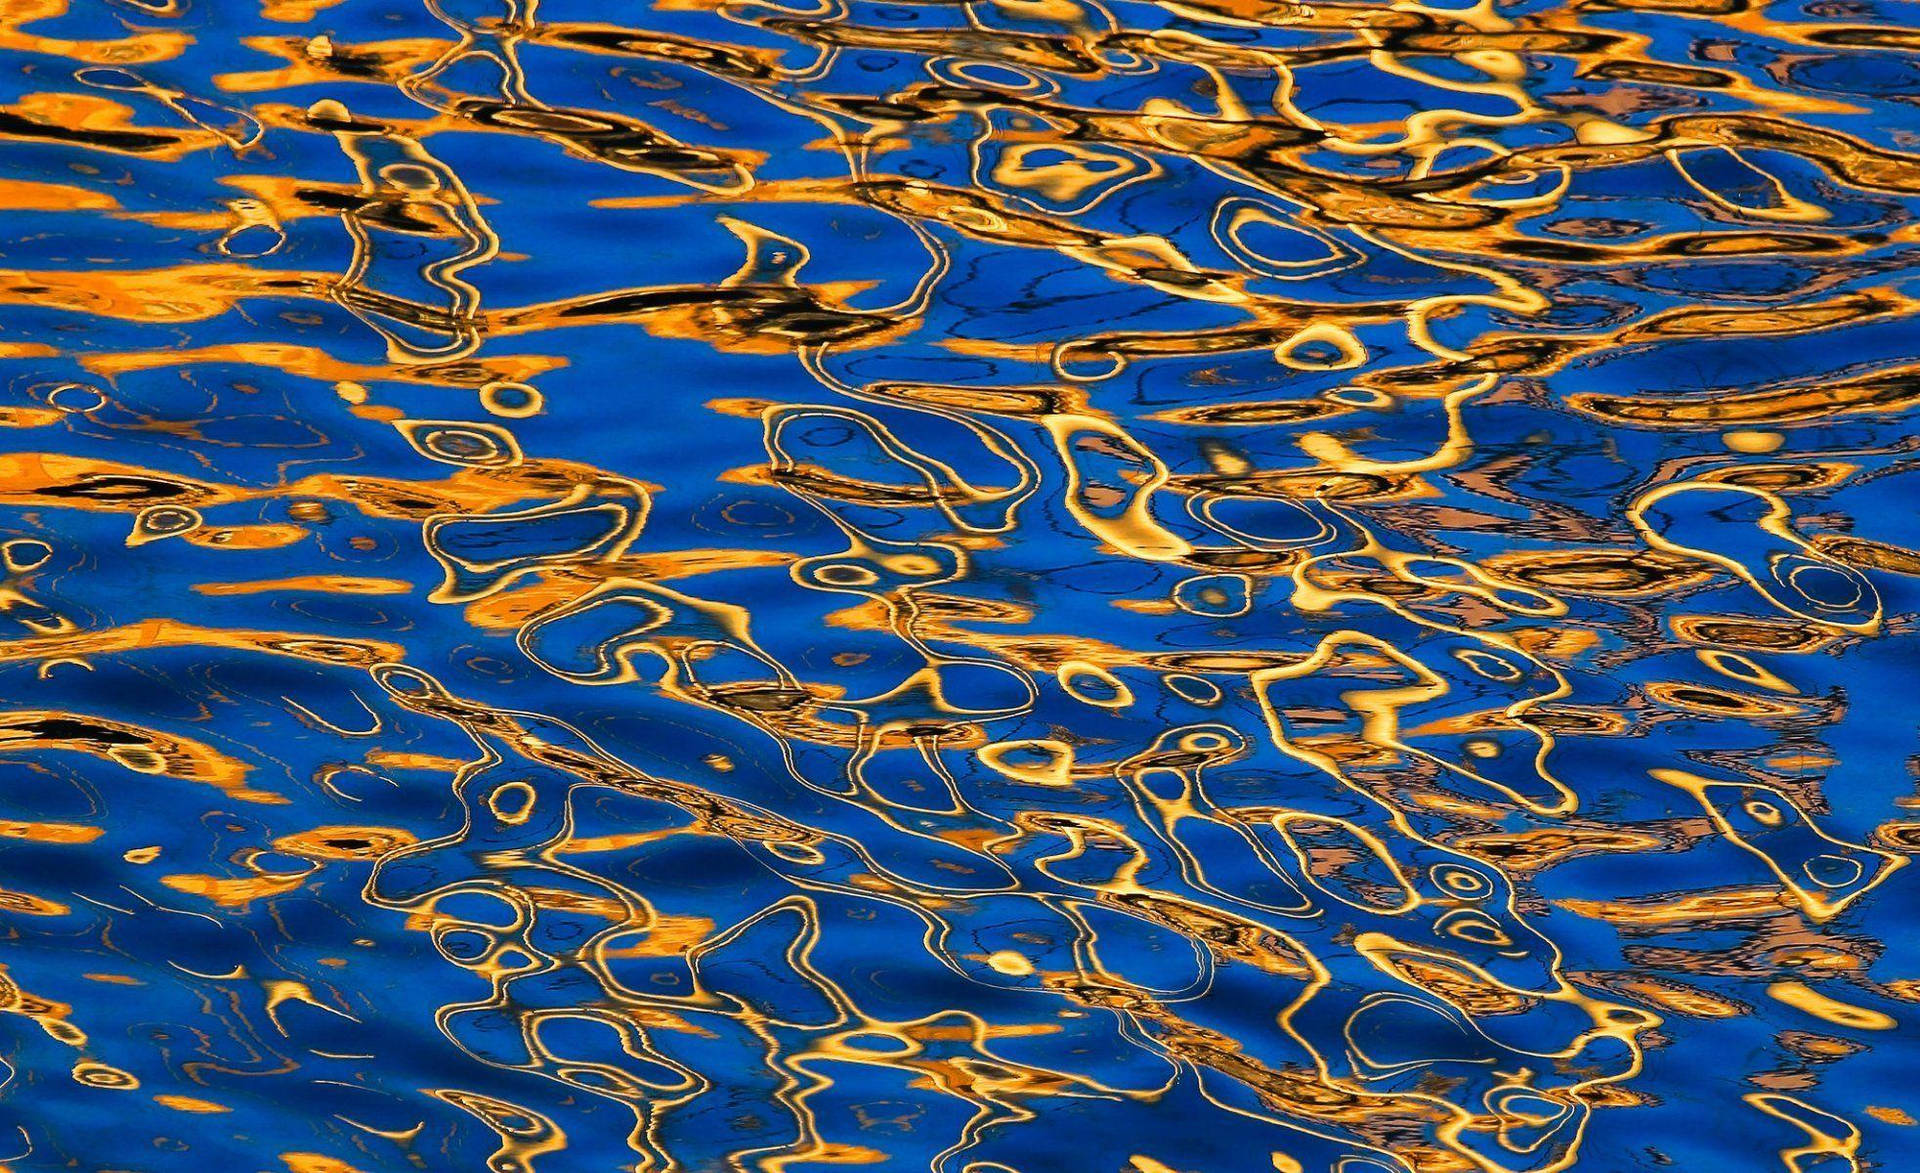 Gold-colored Rippling Effect Wallpaper